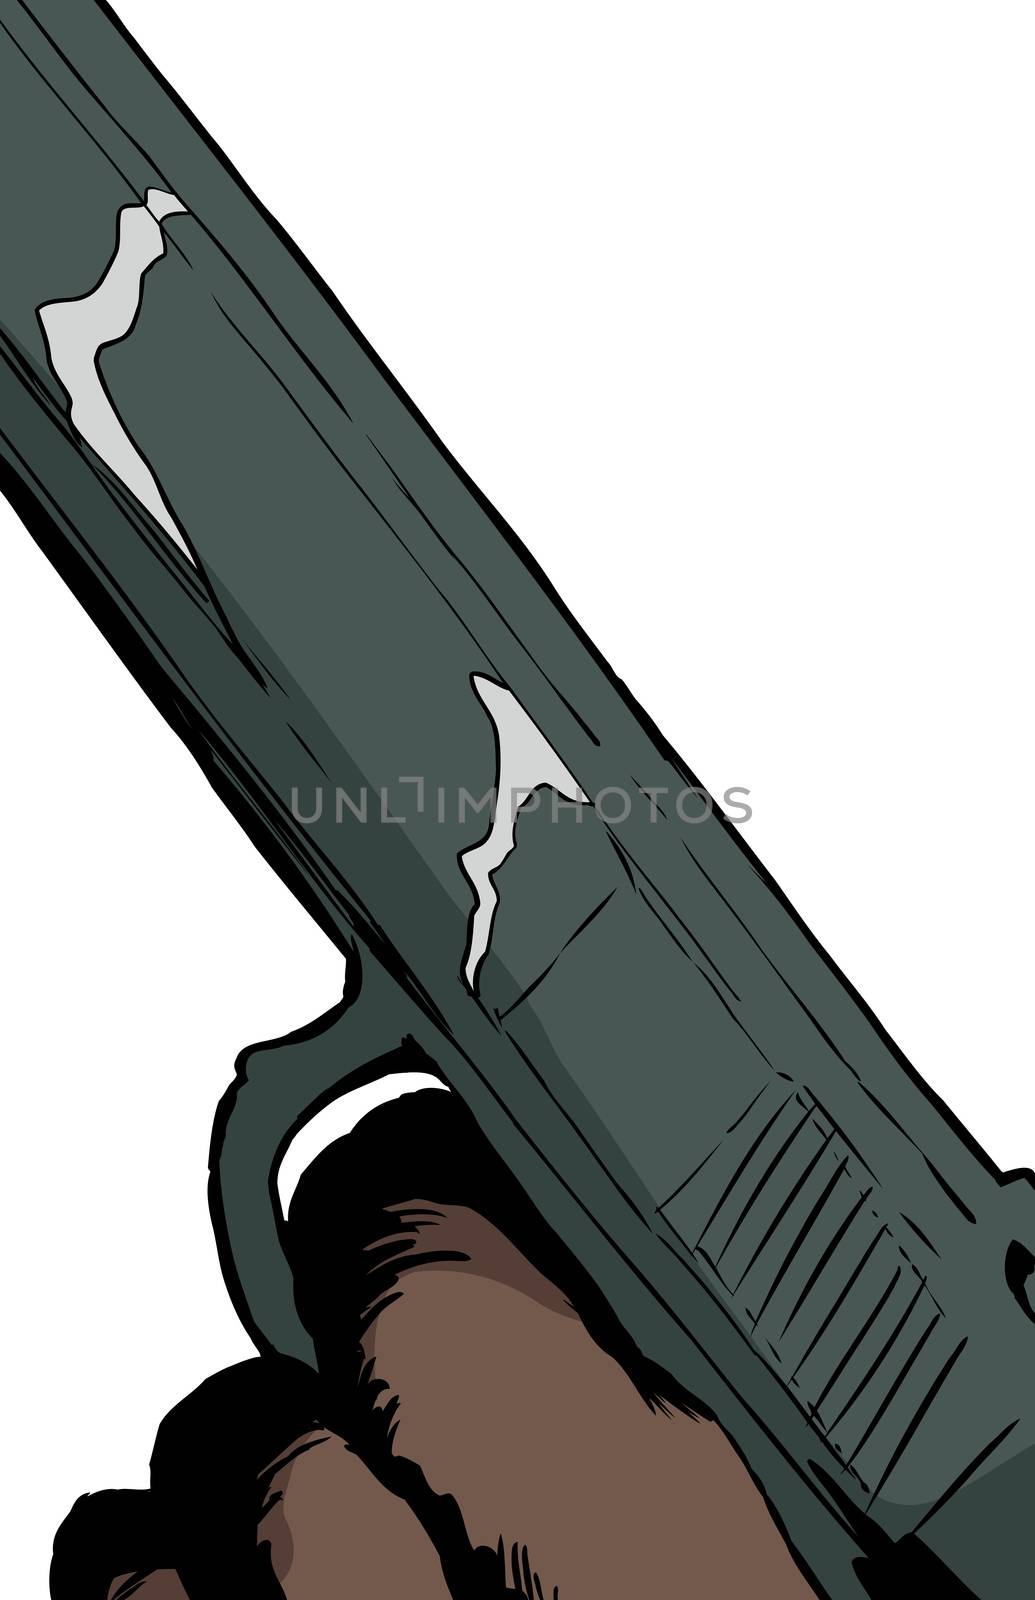 Illustration of close up on finger in trigger of automatic pistol